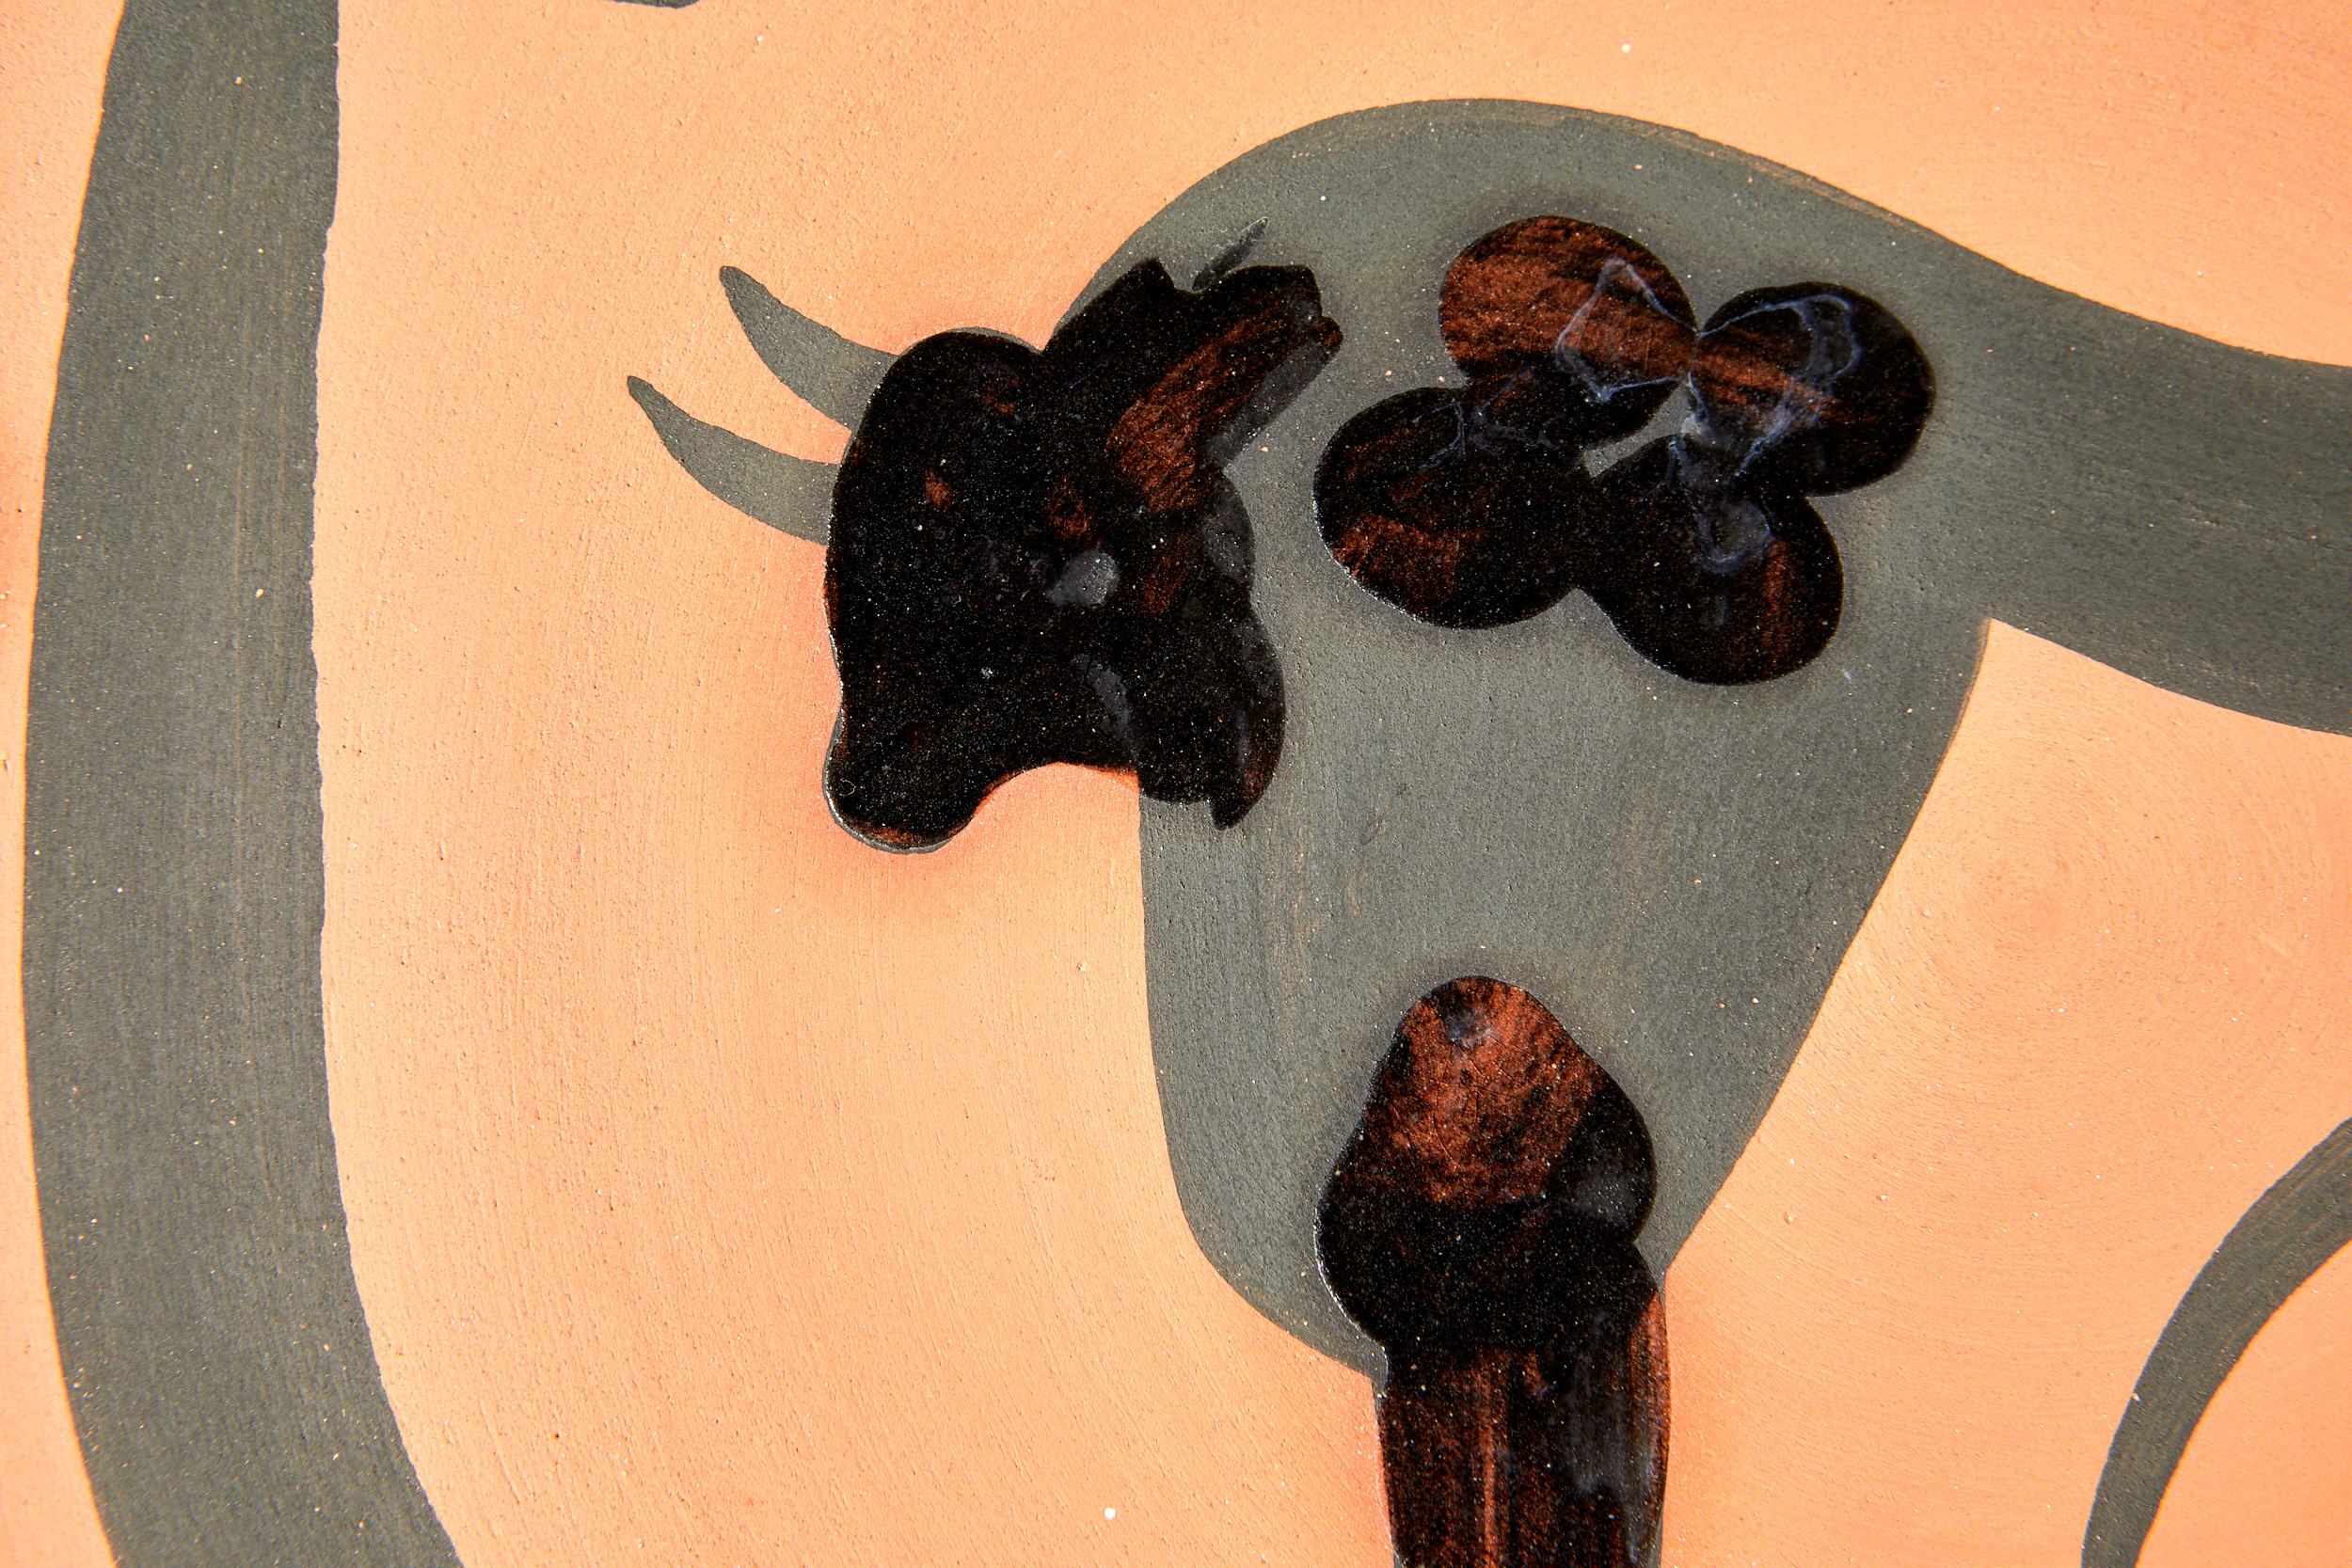 Mid-20th Century Pablo Picasso, Bull, Turned round dish, 1957, edition of 250 copies. For Sale